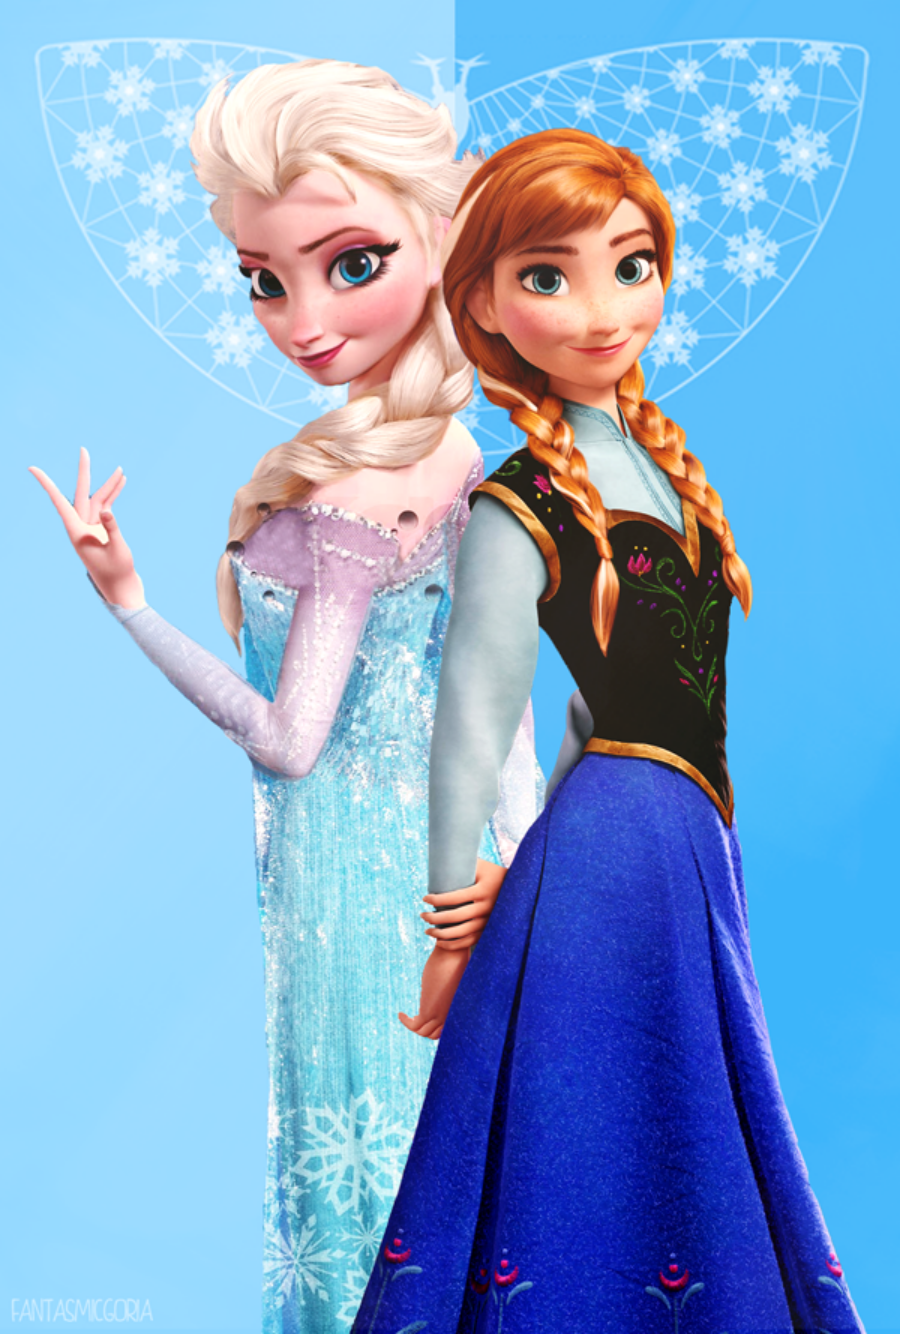 Sisters Elsa and Anna embracing each other in the mountains of Arendelle